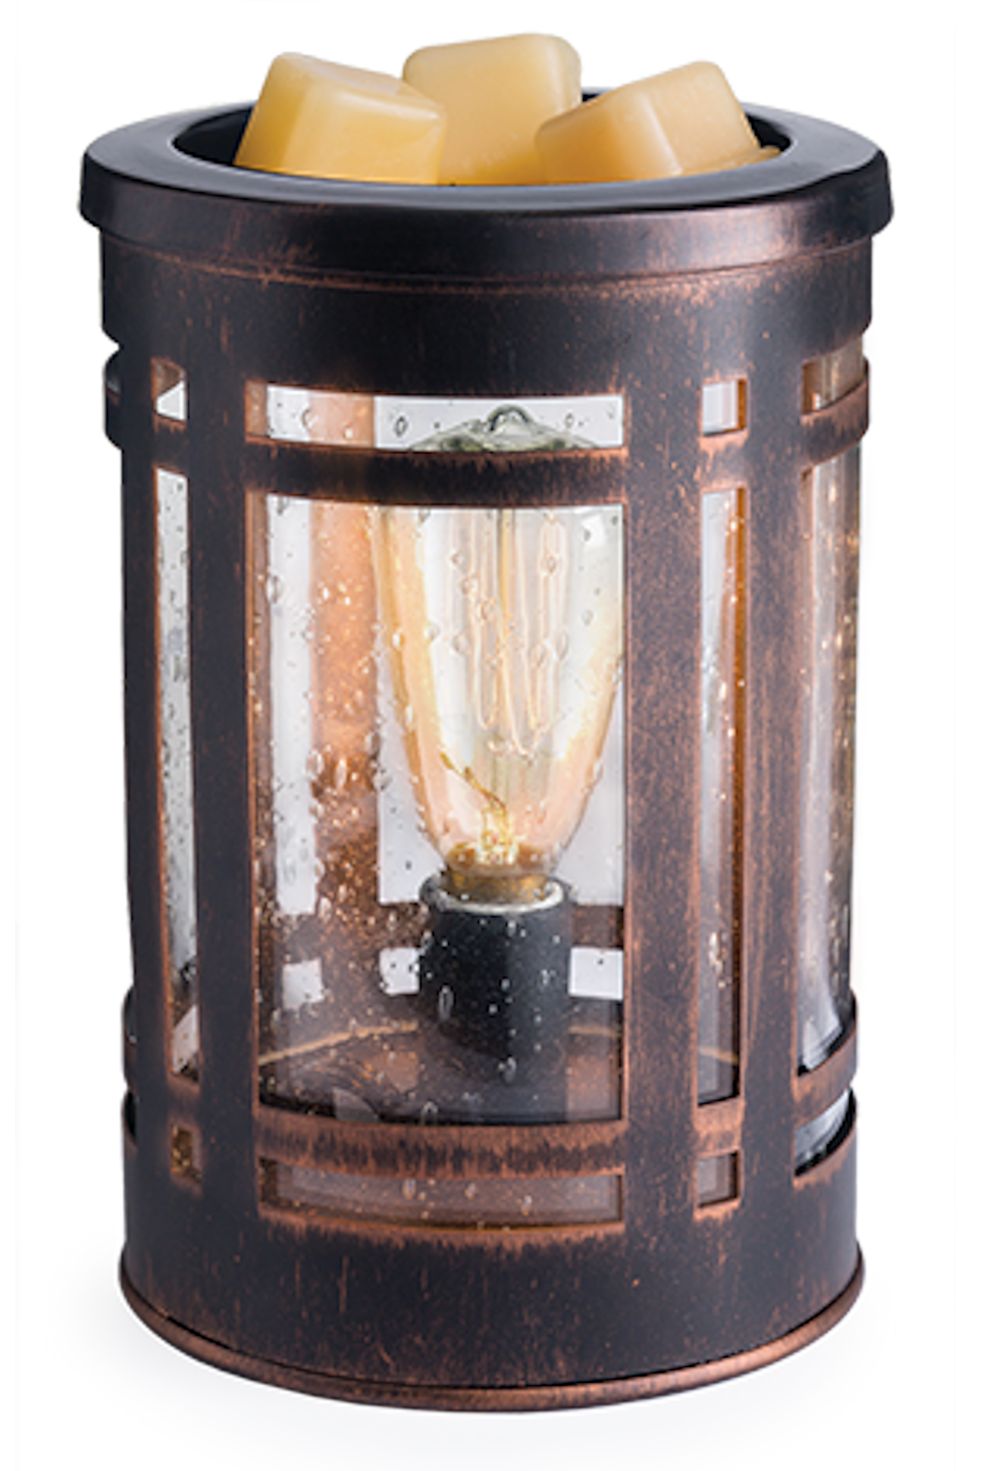 MISSION VINTAGE Bulb Illumination Fragrance Warmer by Candle Warmers